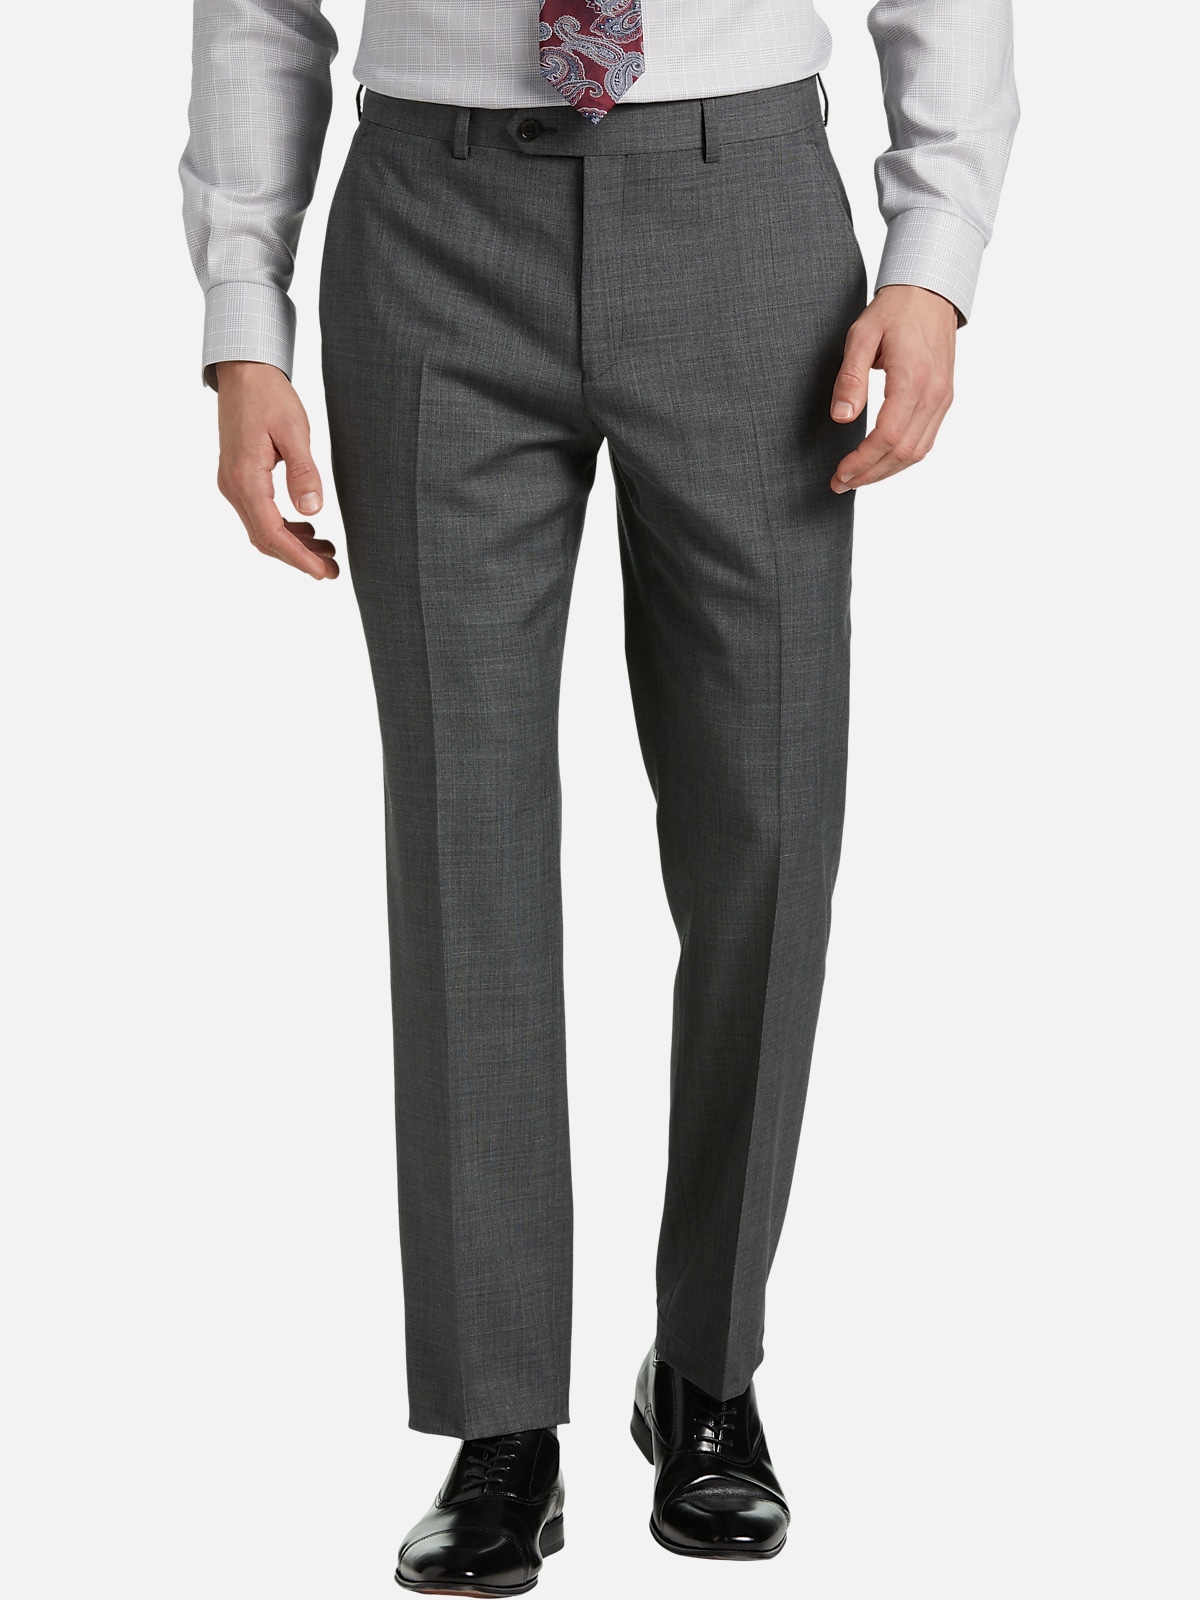 Joseph Abboud Classic Fit Suits Separates Pants | All Clearance $39.99 ...